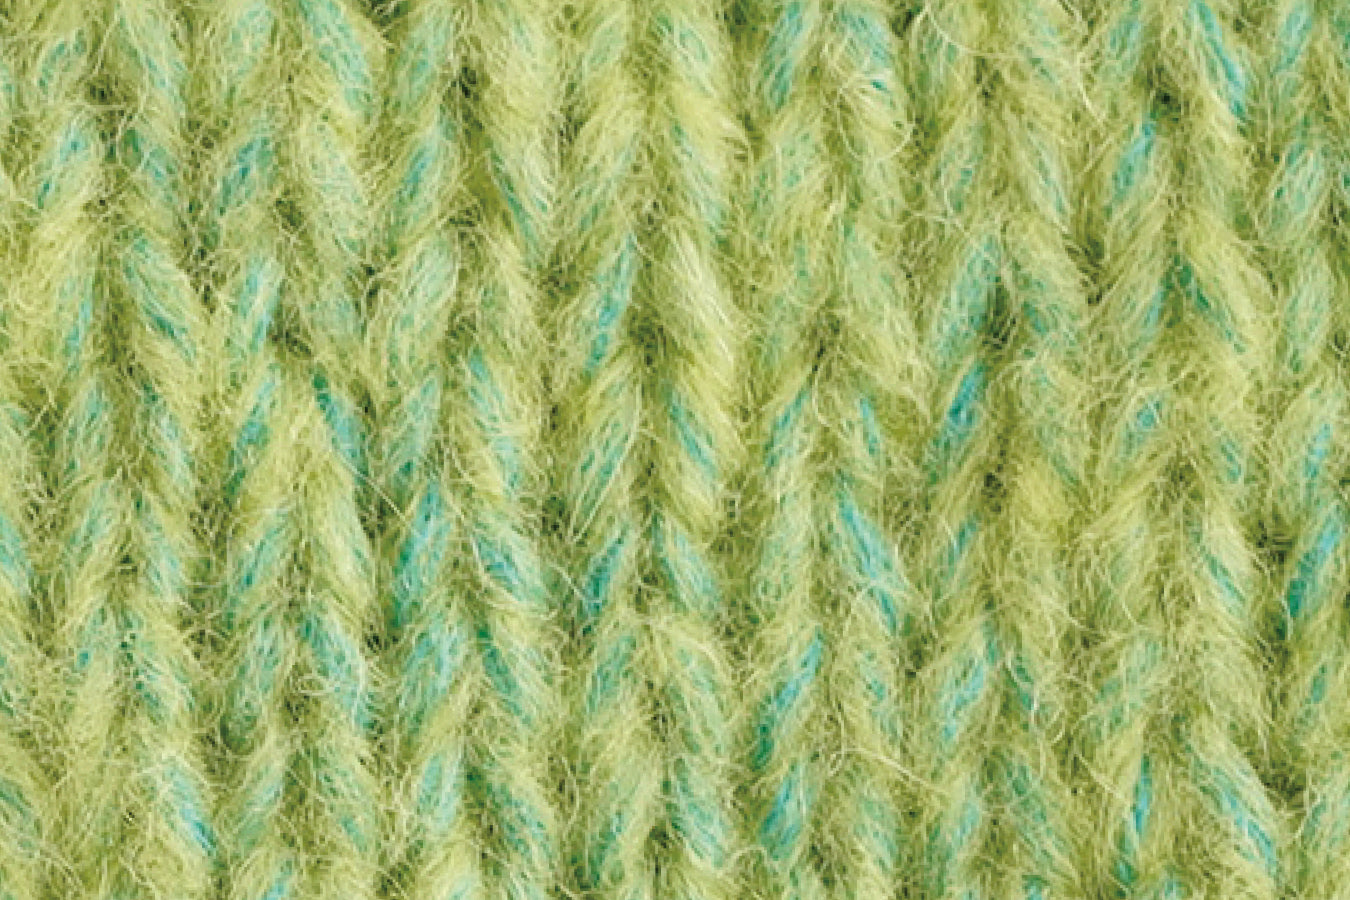 Clover Japan - Darning yarn - cool blue and green tones